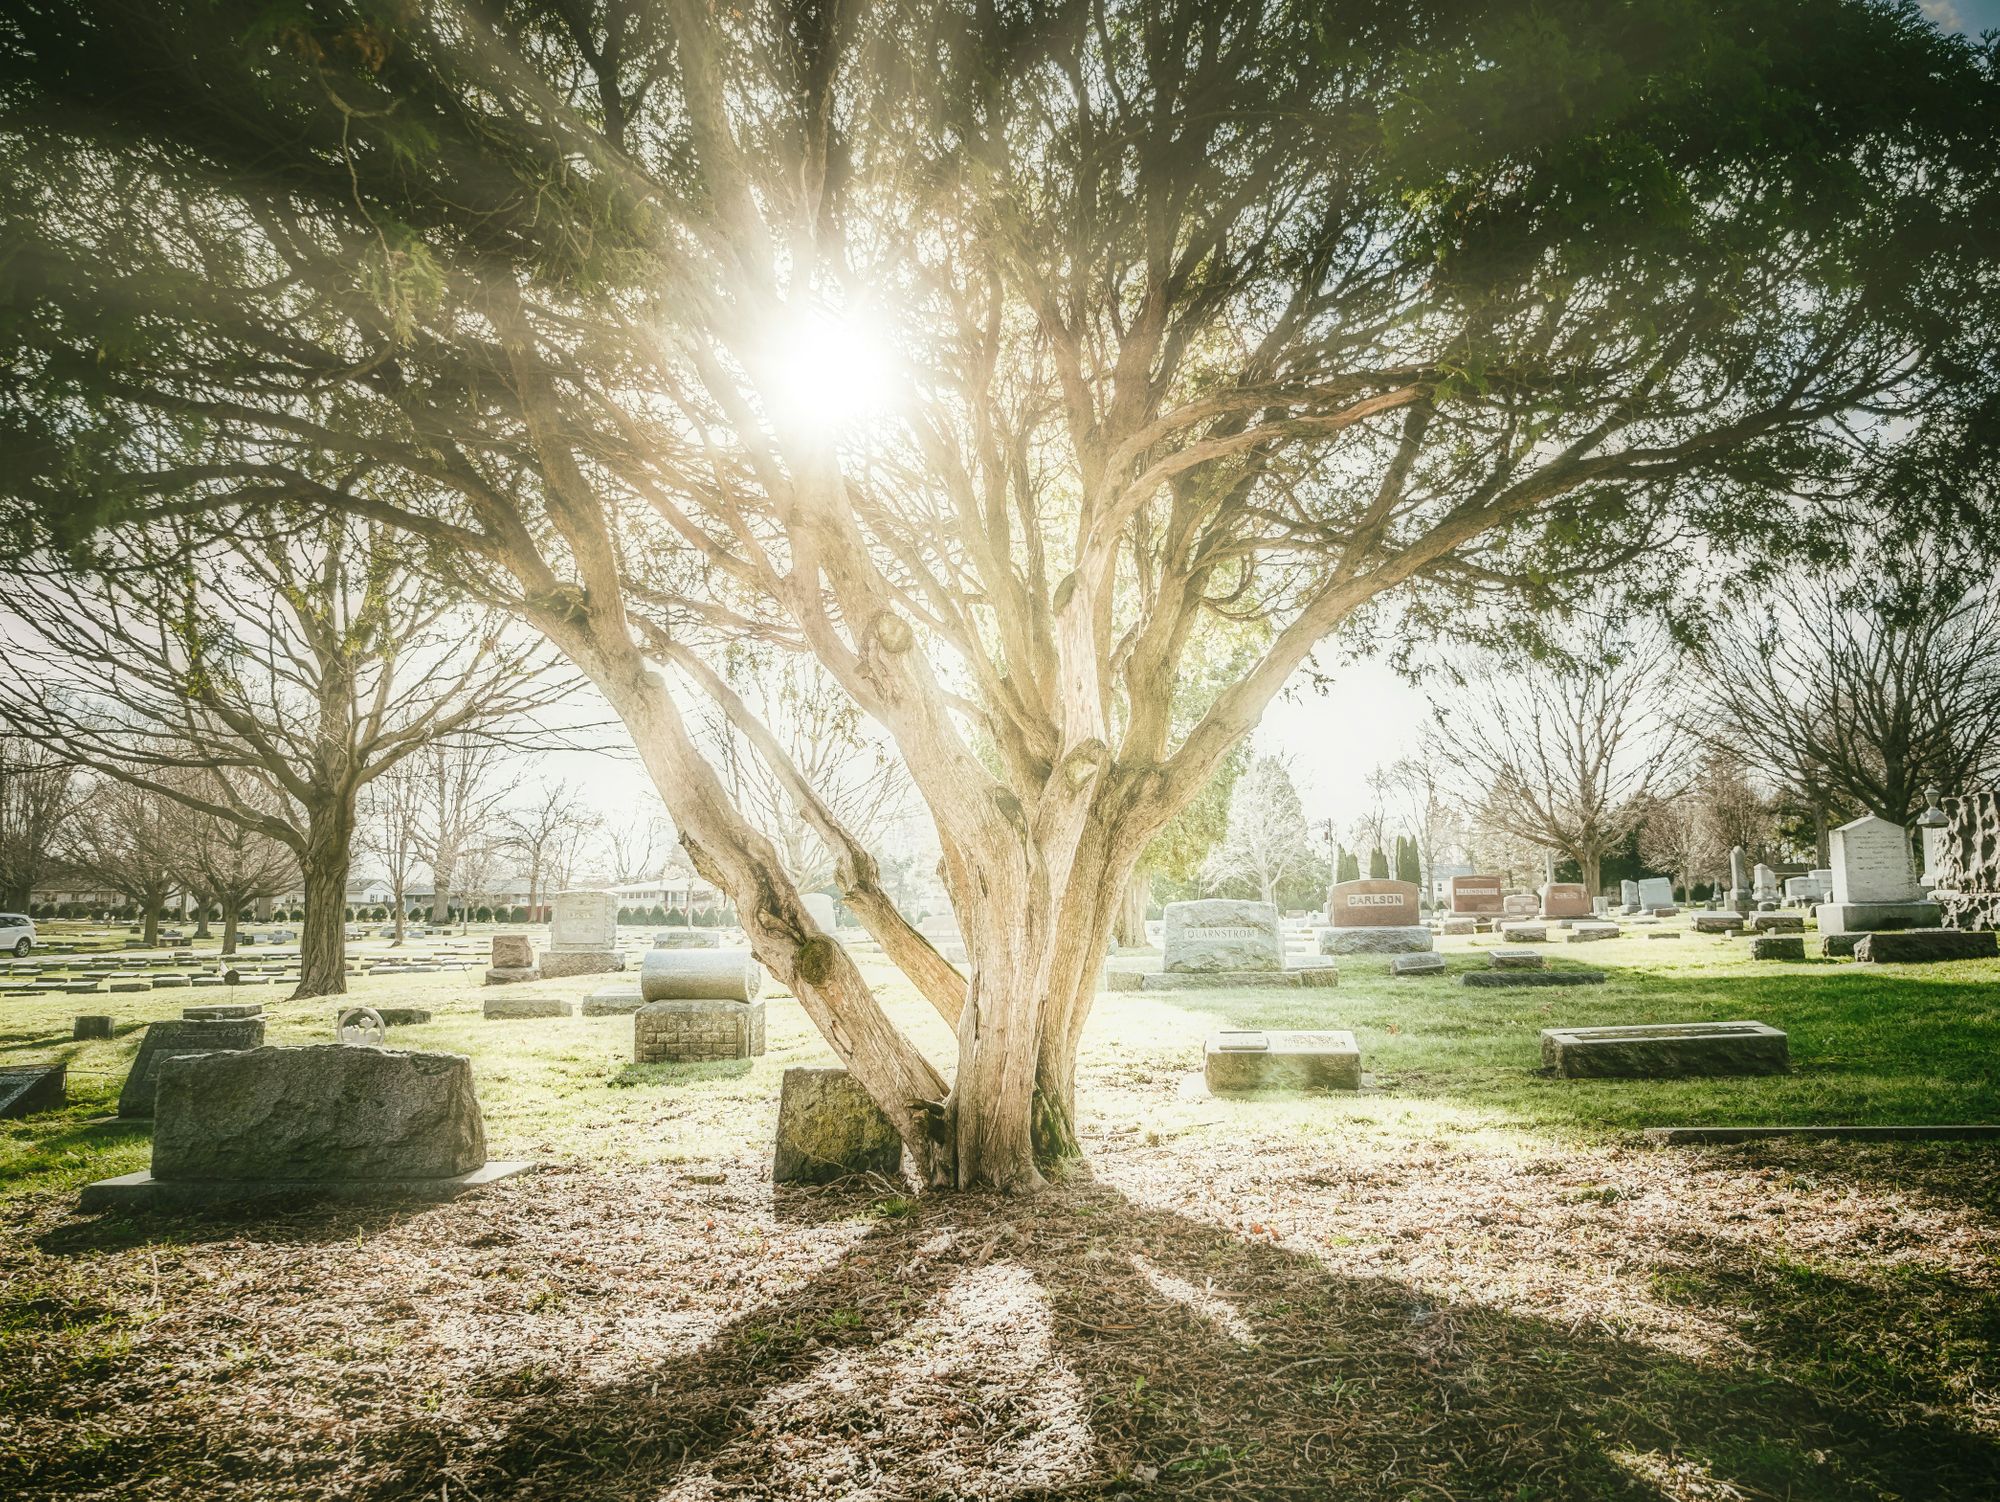 Discover the variety of cemetery plot sizes, from single to family plots, and how cemeteries are laid out with sections, blocks, and rows. Explore specialized areas like mausoleums and scattering gardens.